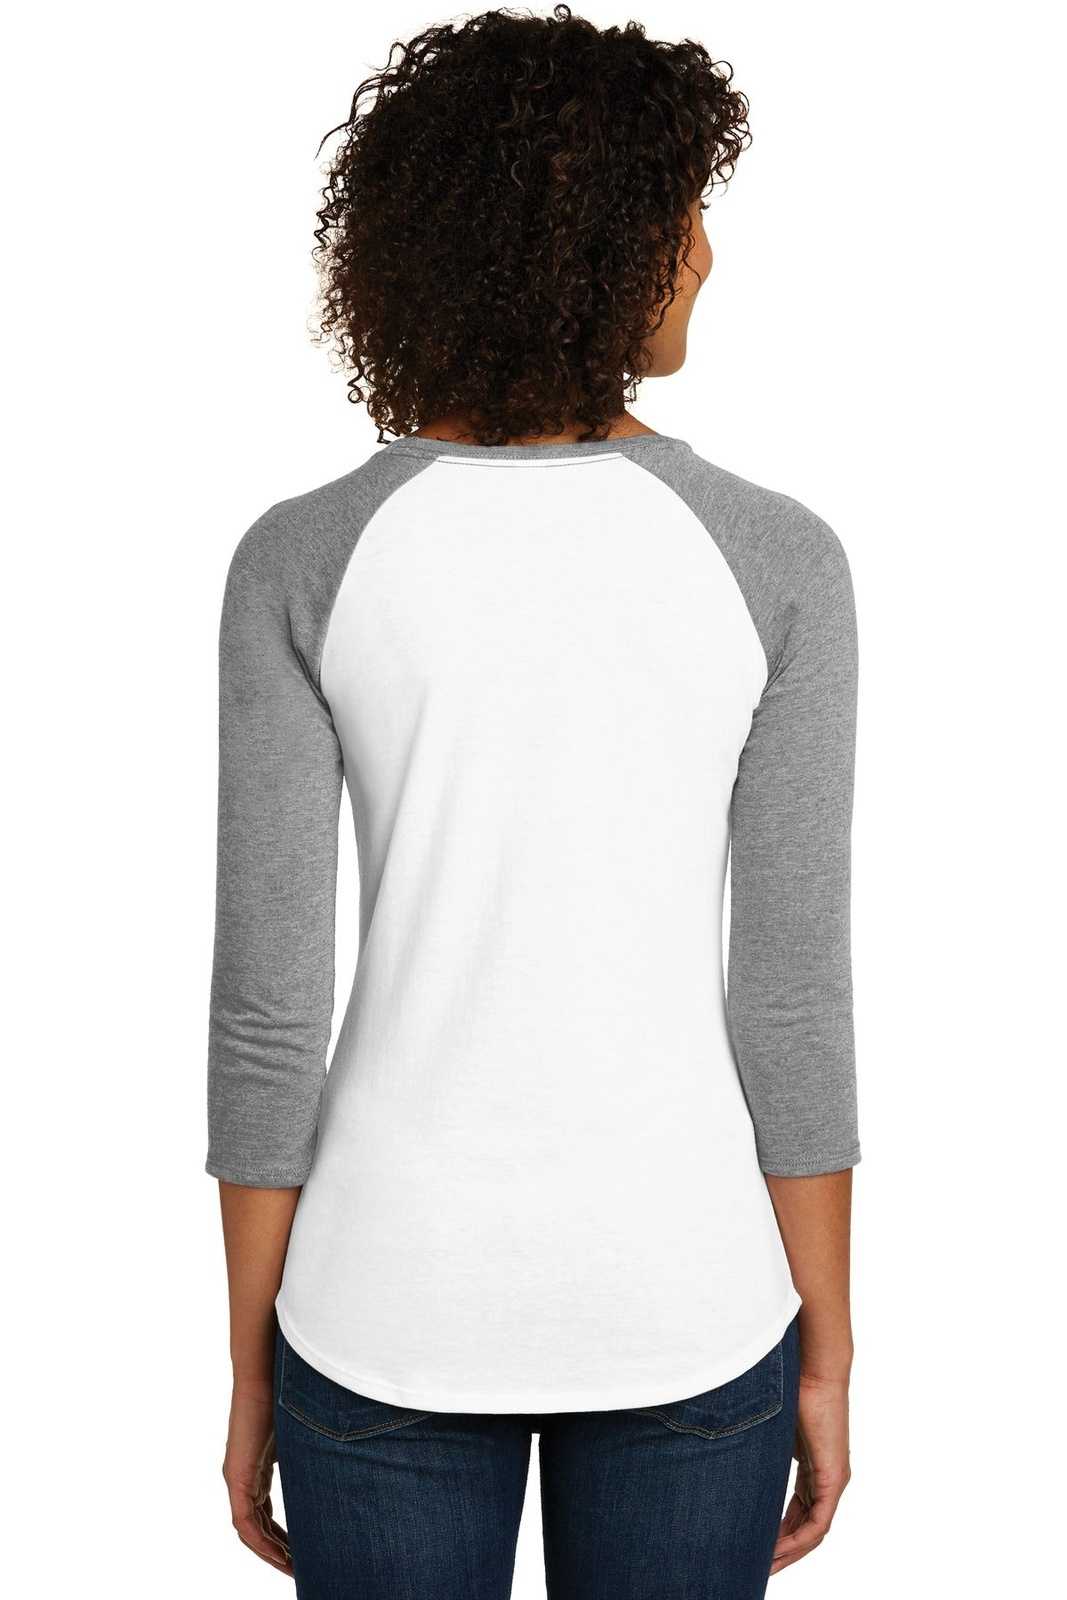 District DT6211 Women's Fitted Very Important Tee 3/4-Sleeve Raglan - Light Heather Gray White - HIT a Double - 1